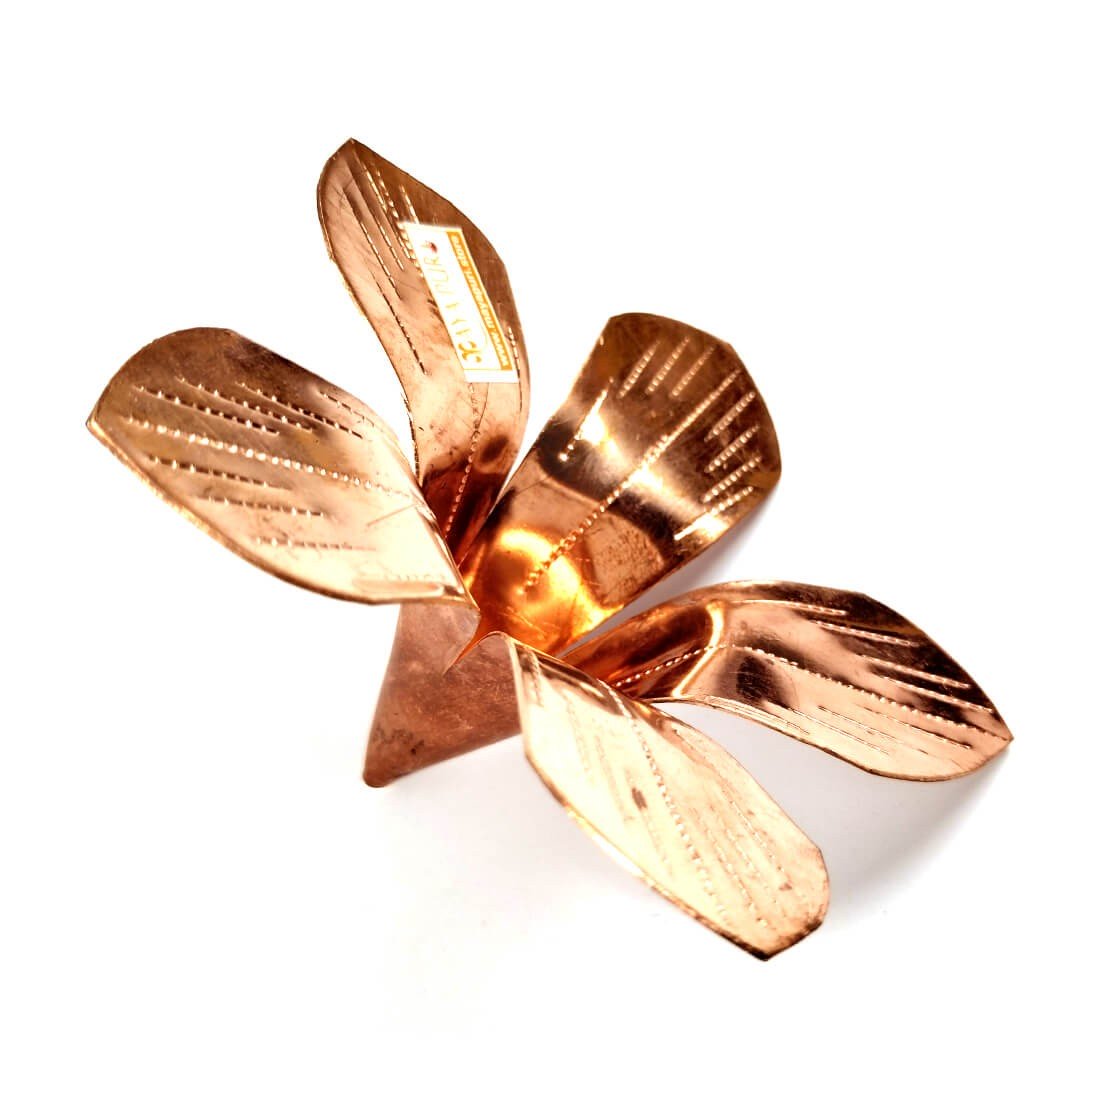 Copper Amra Pallav/Aam patta/Pooja Mango Leaf for Puja | Size: 3.5x3.5x3.5 inches